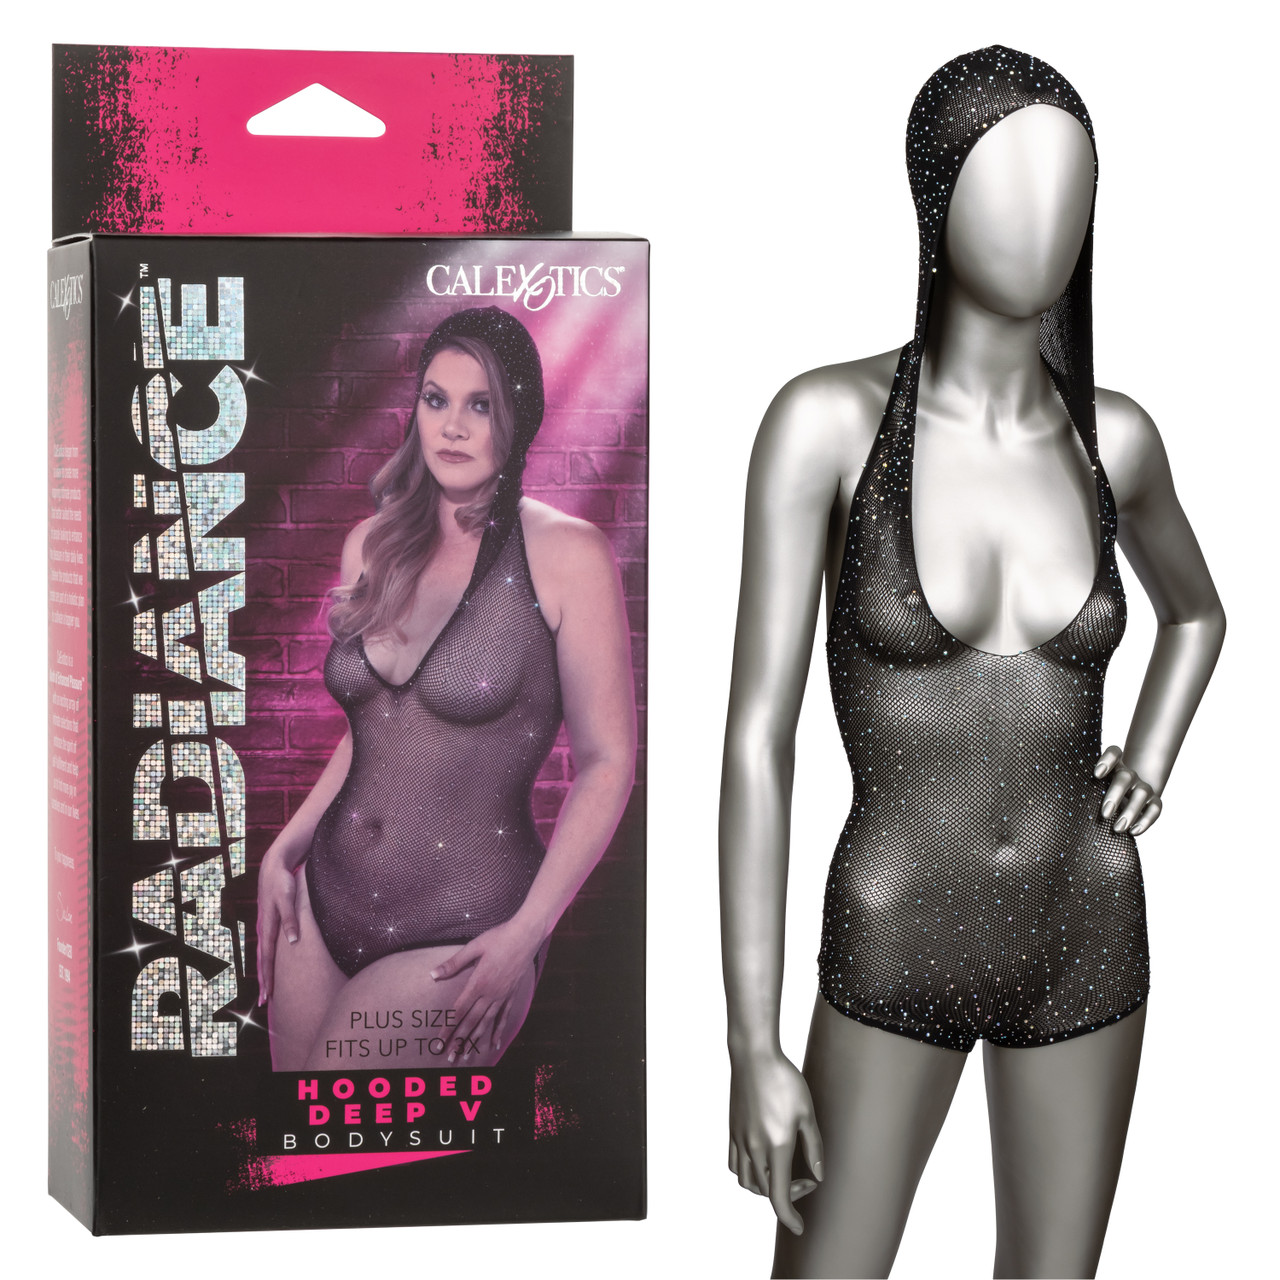 RADIANCE PLUS SIZE HOODED DEEP V BODY SUIT - Click Image to Close